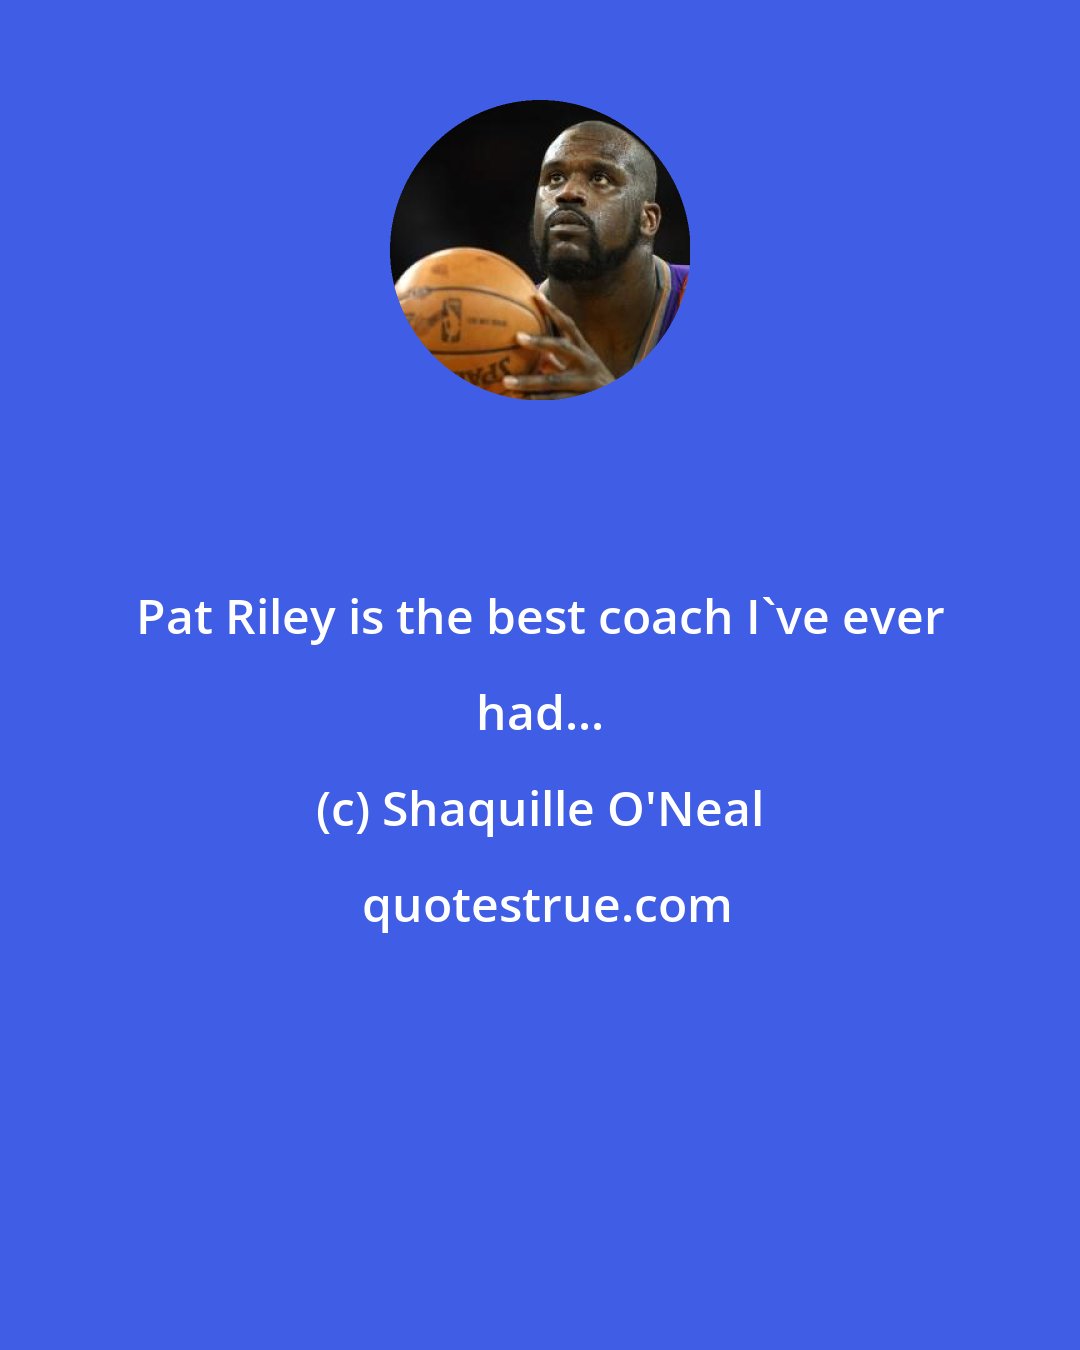 Shaquille O'Neal: Pat Riley is the best coach I've ever had...